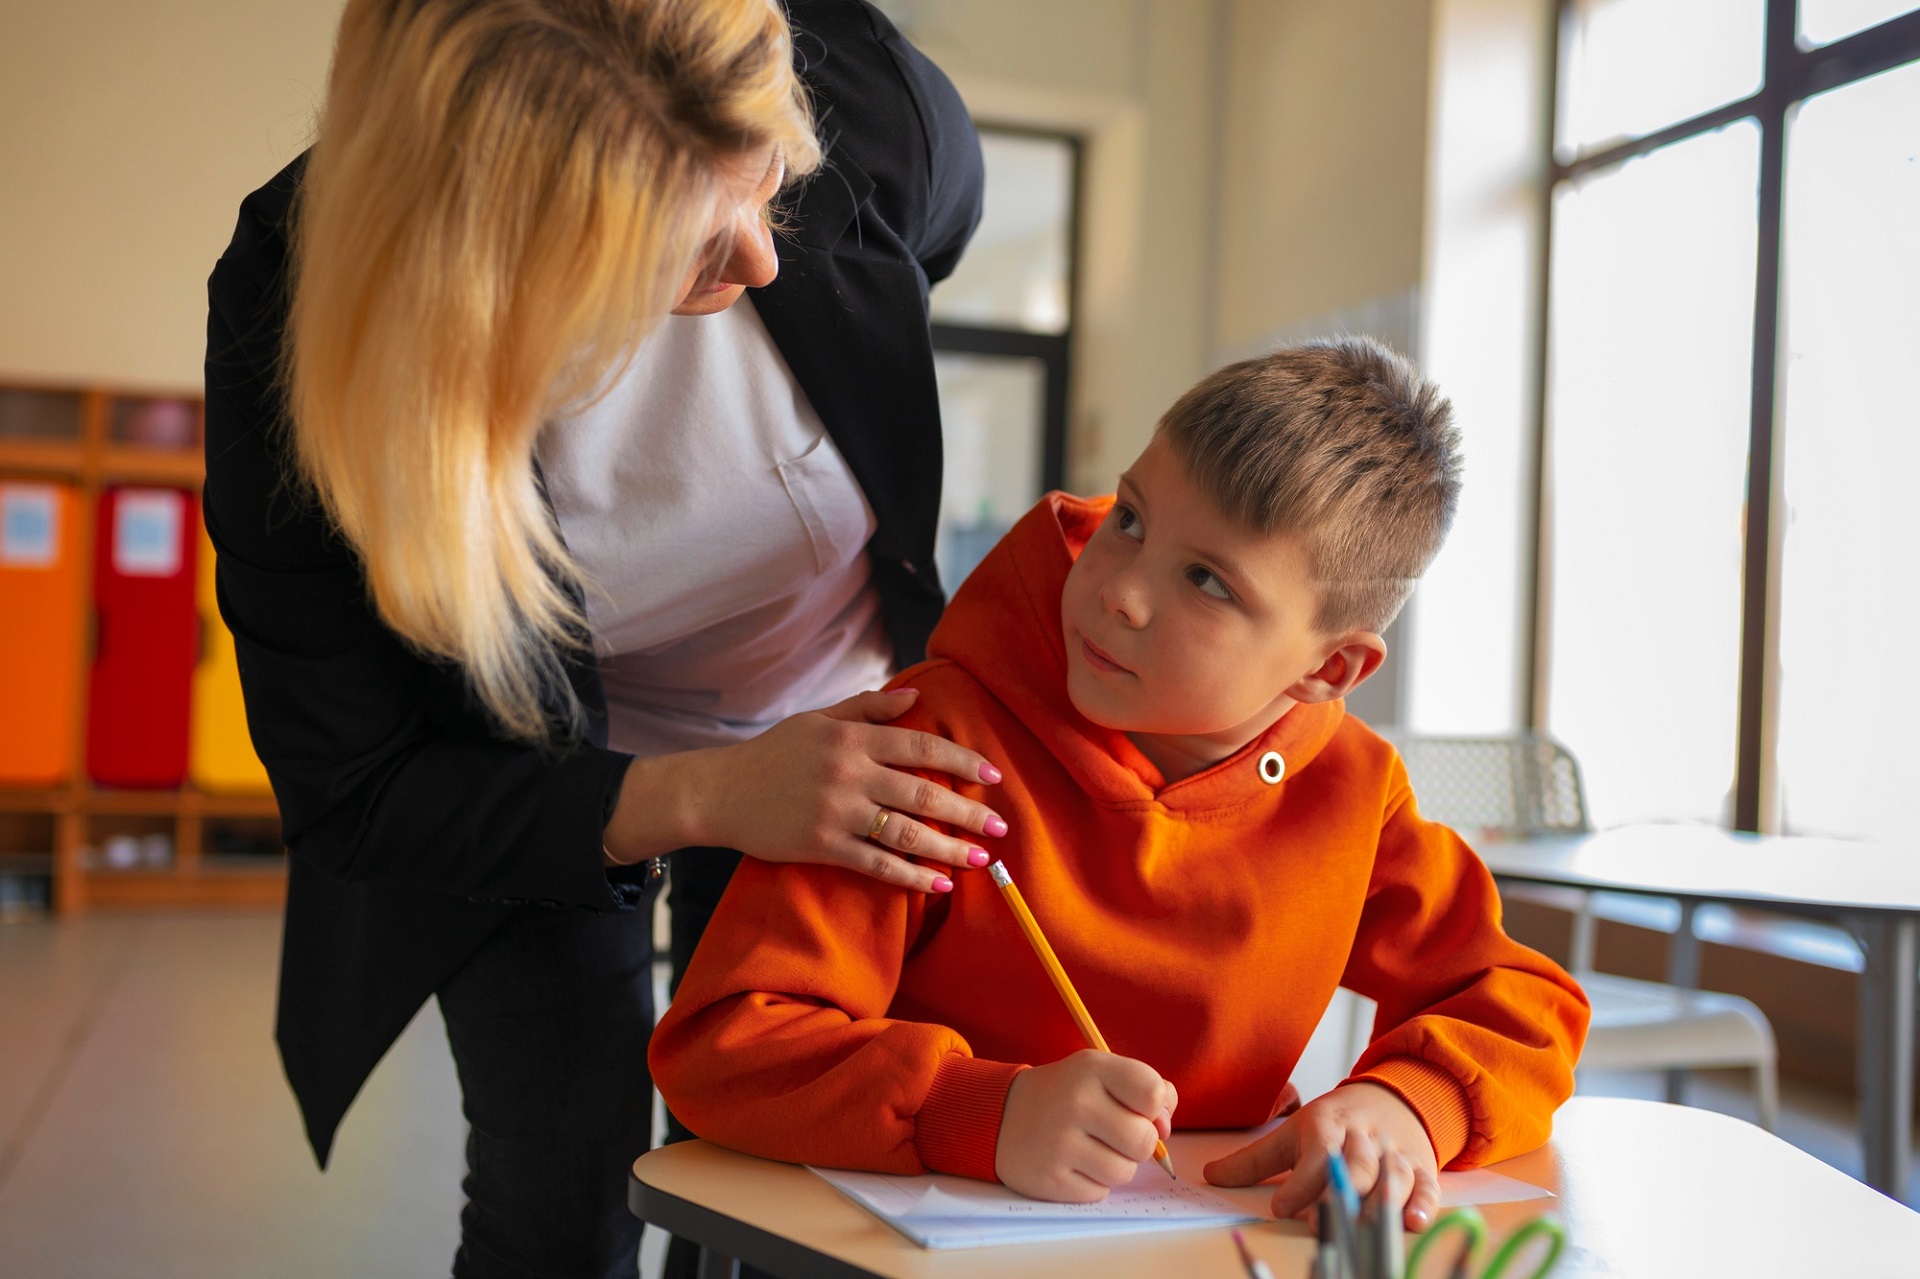 Attachment Disorders  Causes, Types, Symptoms and Treatment